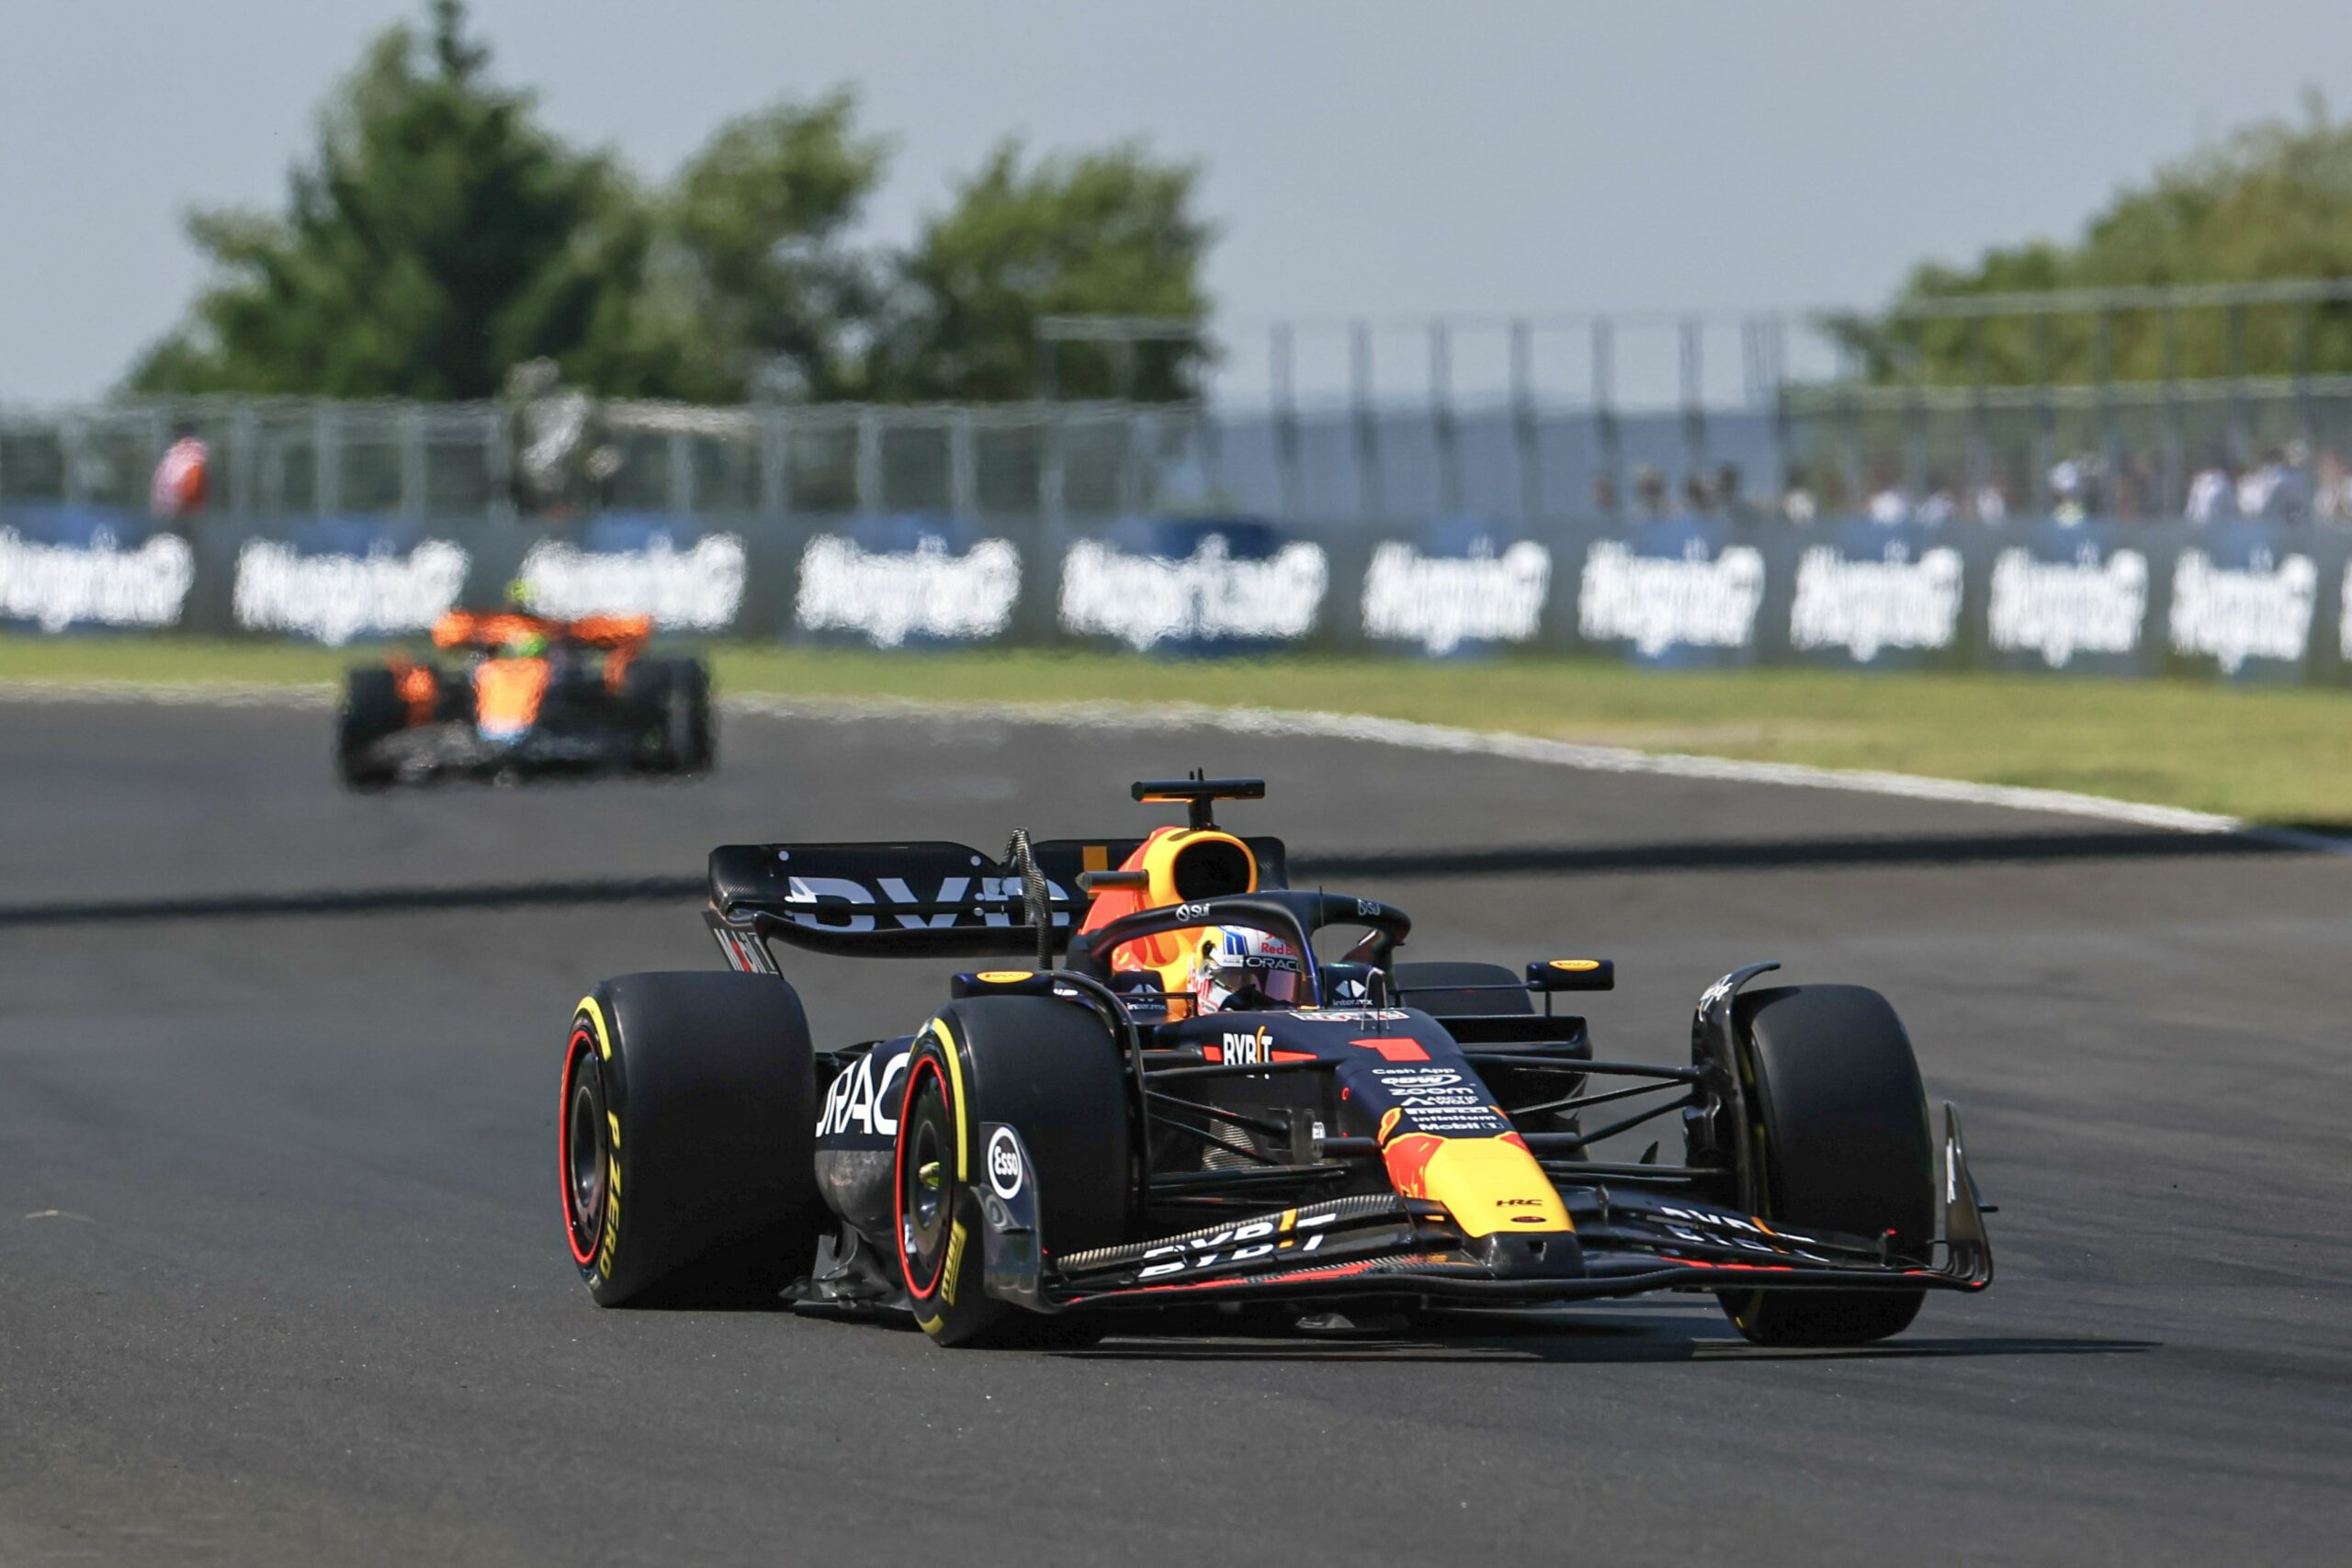 breaking, f1 hungarian grand prix notes: just another record-setting day for verstappen, red bull